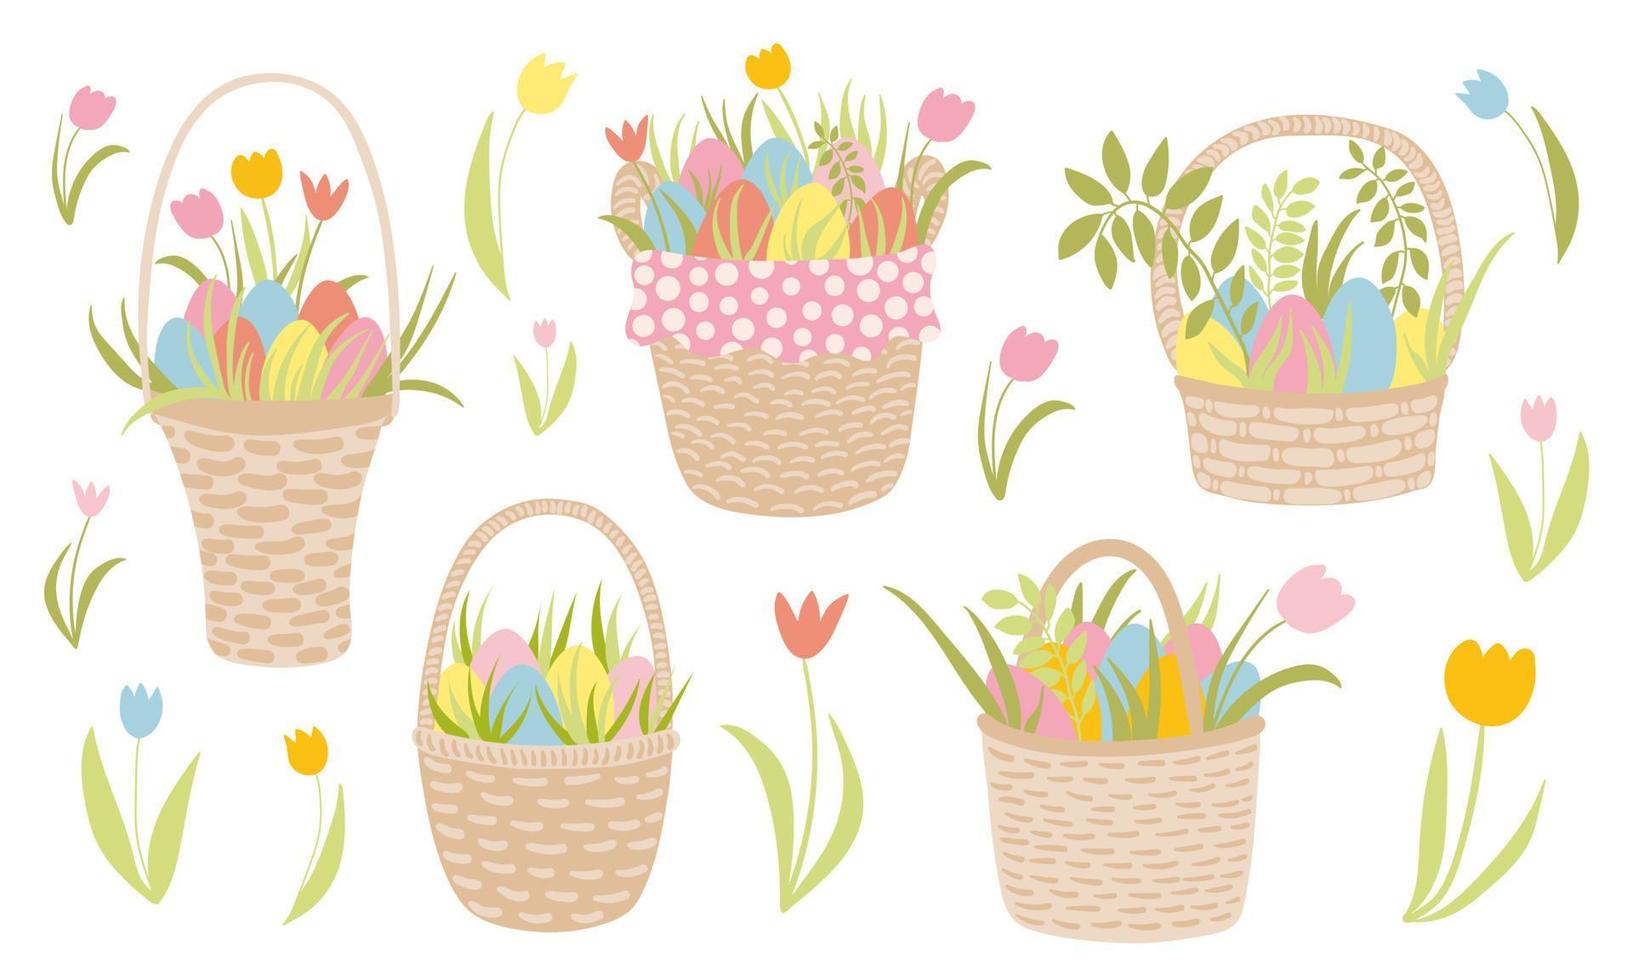 Easter wicker baskets set. Hand drawn vector baskets with eggs and flowers. Cute tulips, flowers, grass. Design for stickers, Easter holiday decoration, invitations, greeting cards.